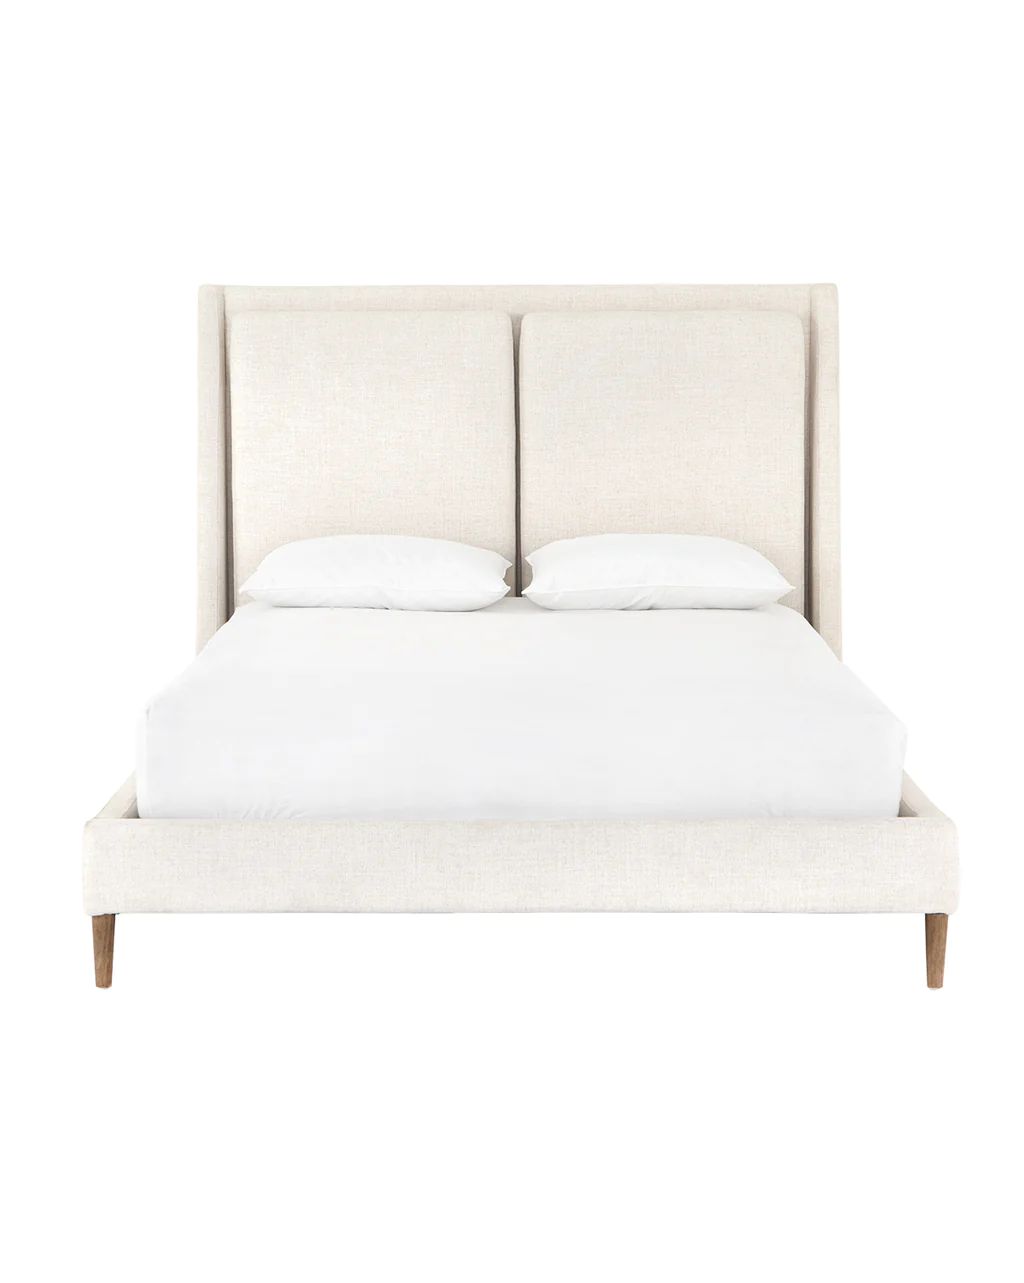 Kayden Bed | McGee & Co.